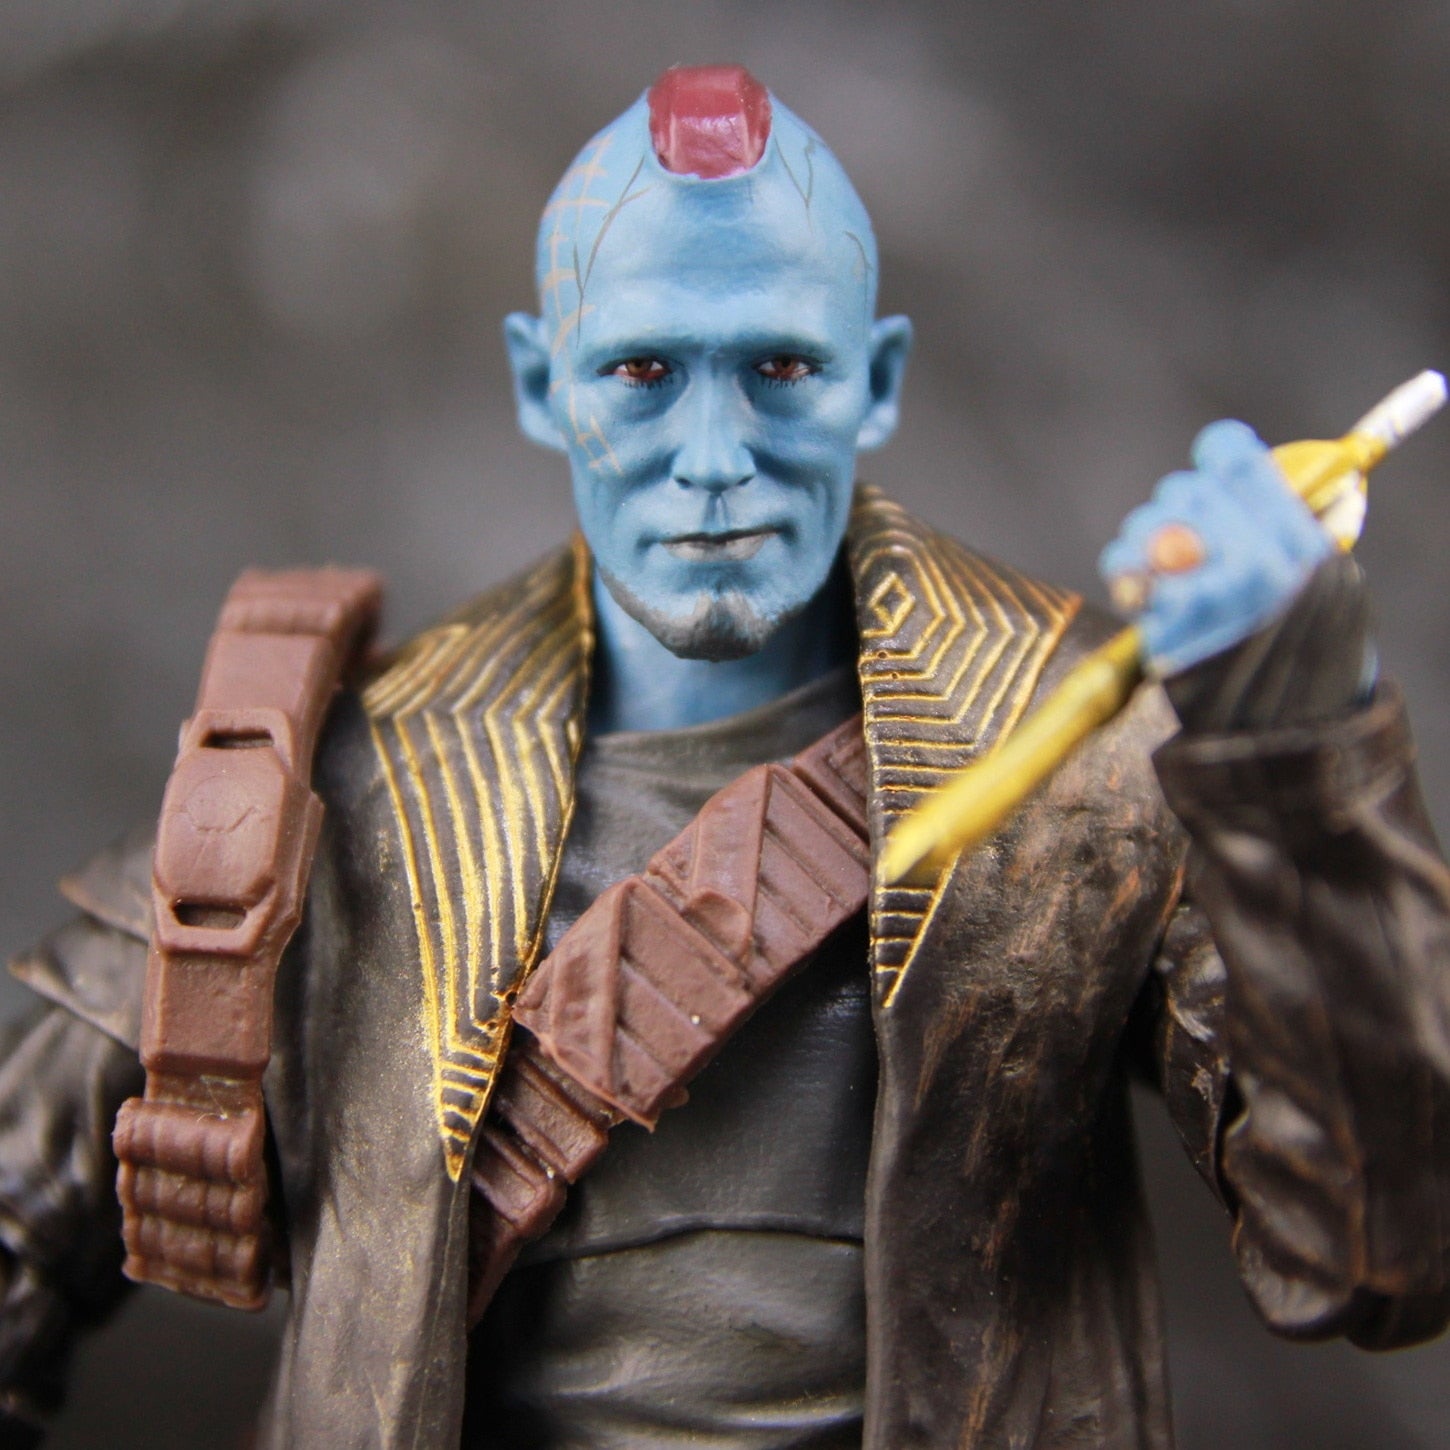 Marvel Guardians of the Galaxy GOTG Yondu Udonta 6" Action Figure